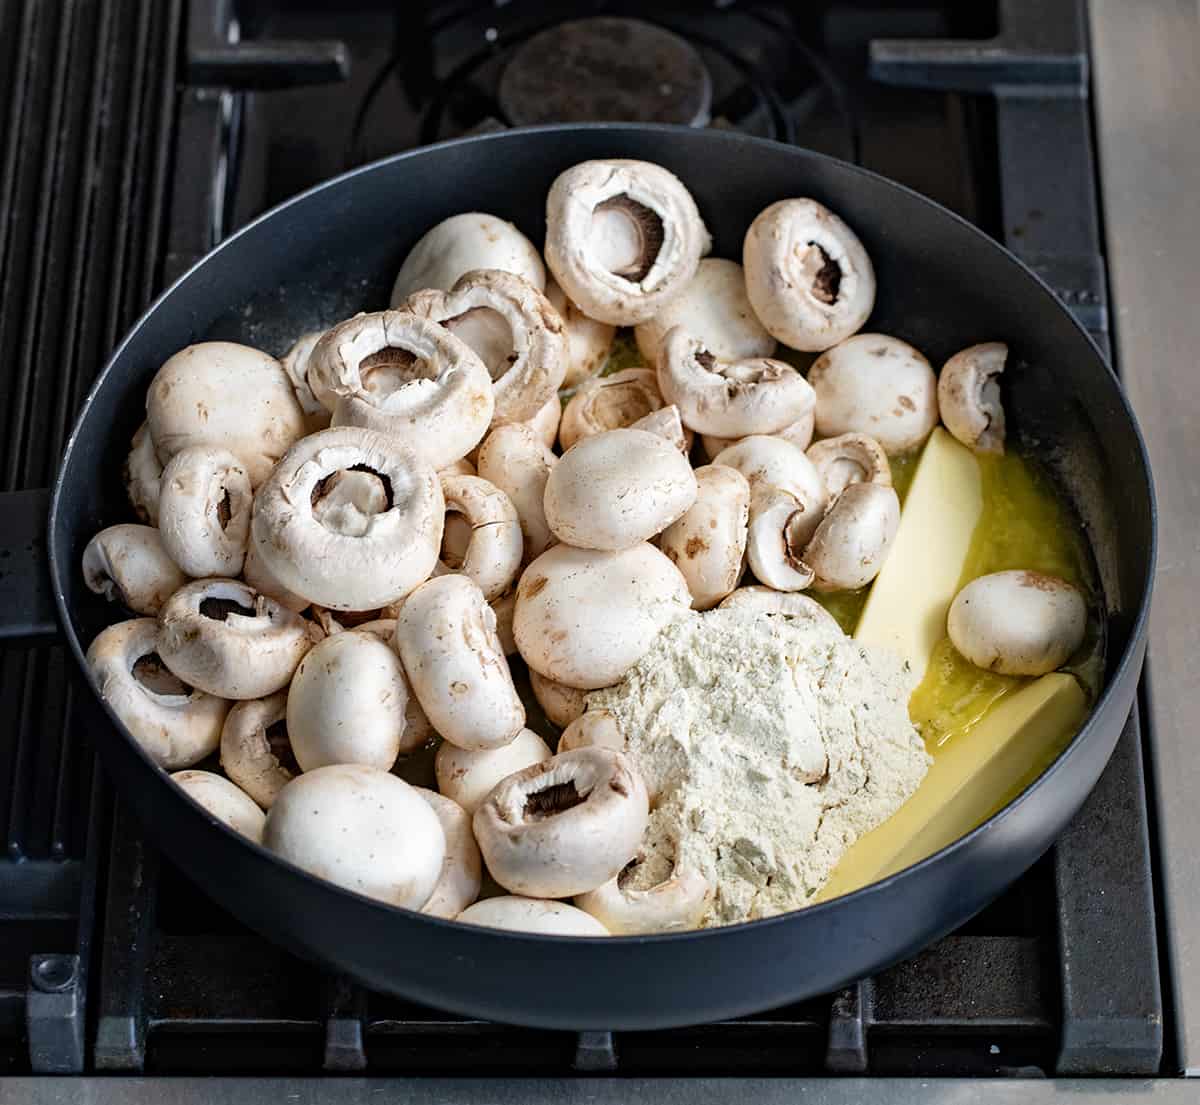 Mushrooms, ranch seasoning, and butter in a pan before heating to make Ranch Mushrooms.